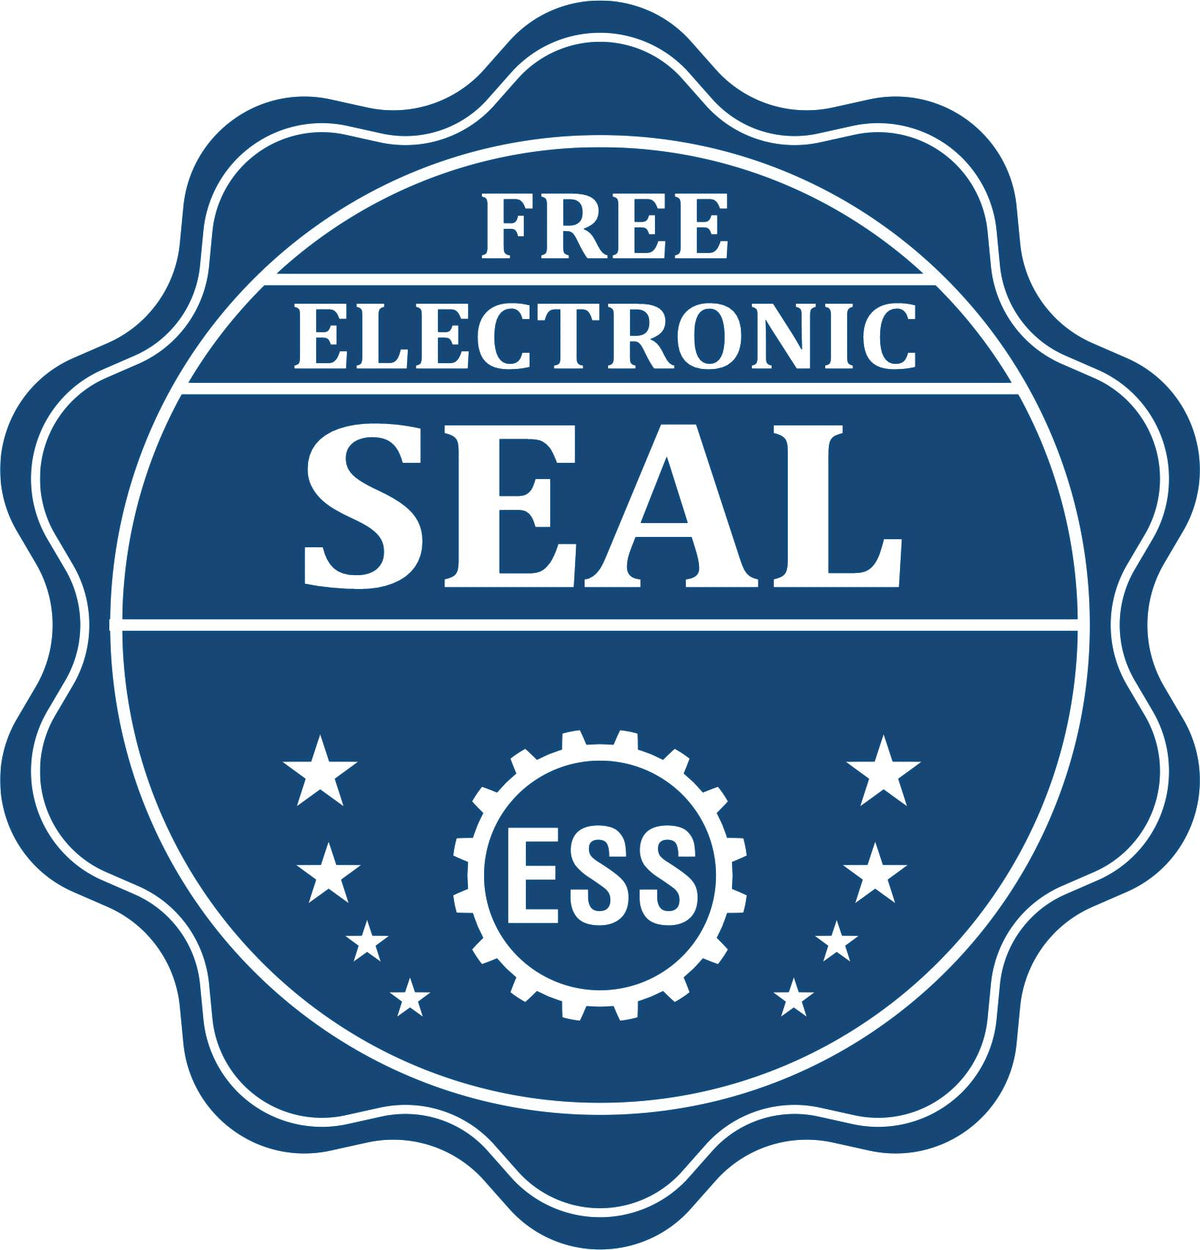 A badge showing a free electronic seal for the PSI Puerto Rico Notary Stamp with stars and the ESS gear on the emblem.